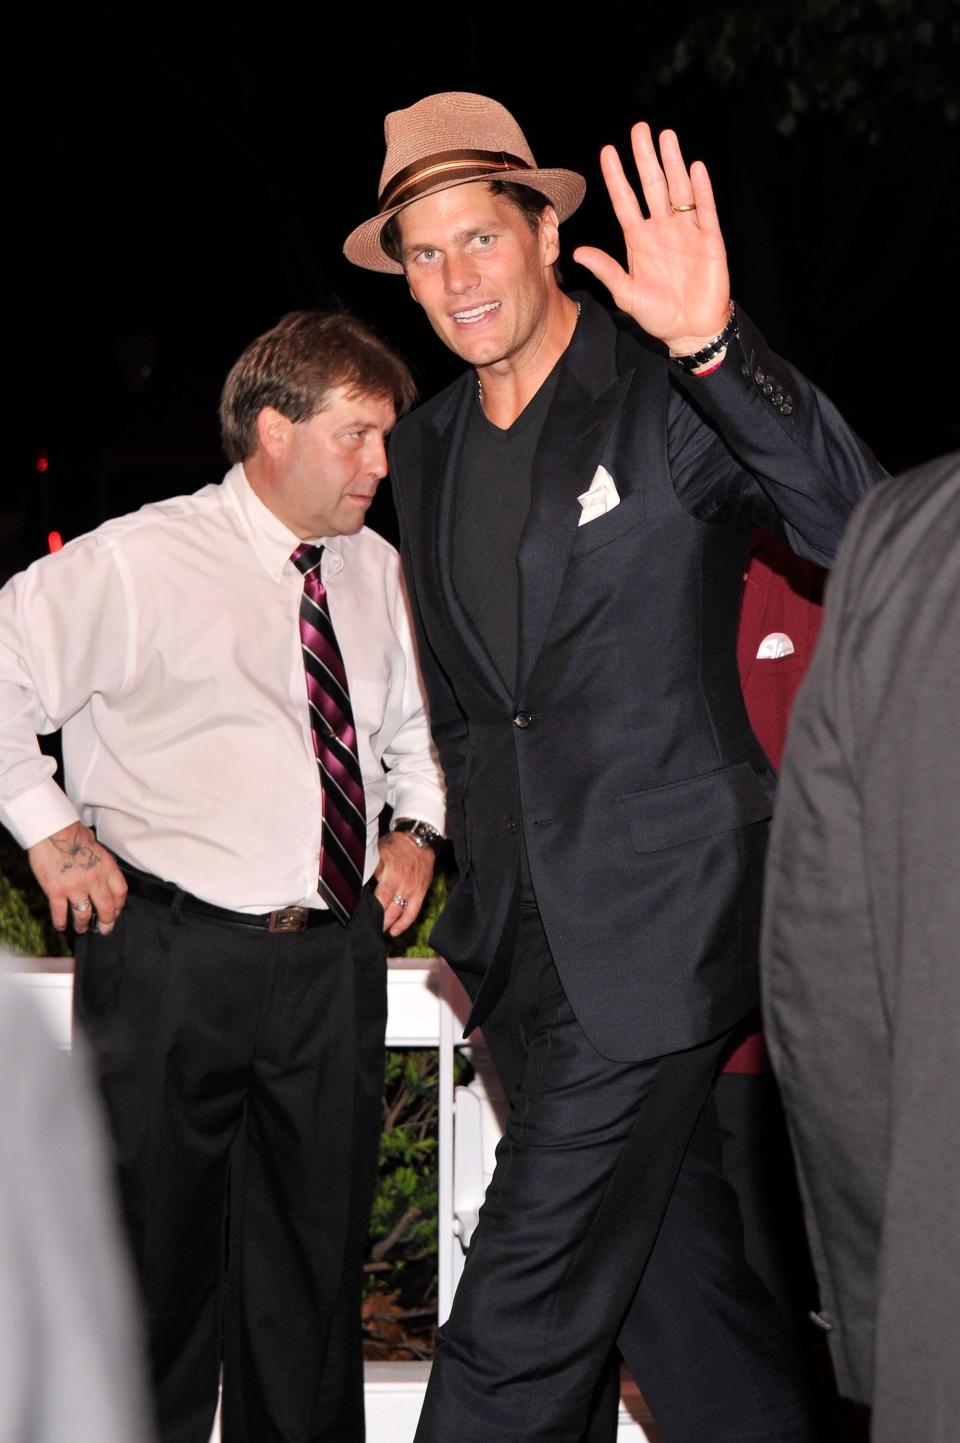 May 2013: Tom Brady attends the 2013 Barnstable-Brown Derby gala at Barnstable-Brown House in Louisville, Kentucky.